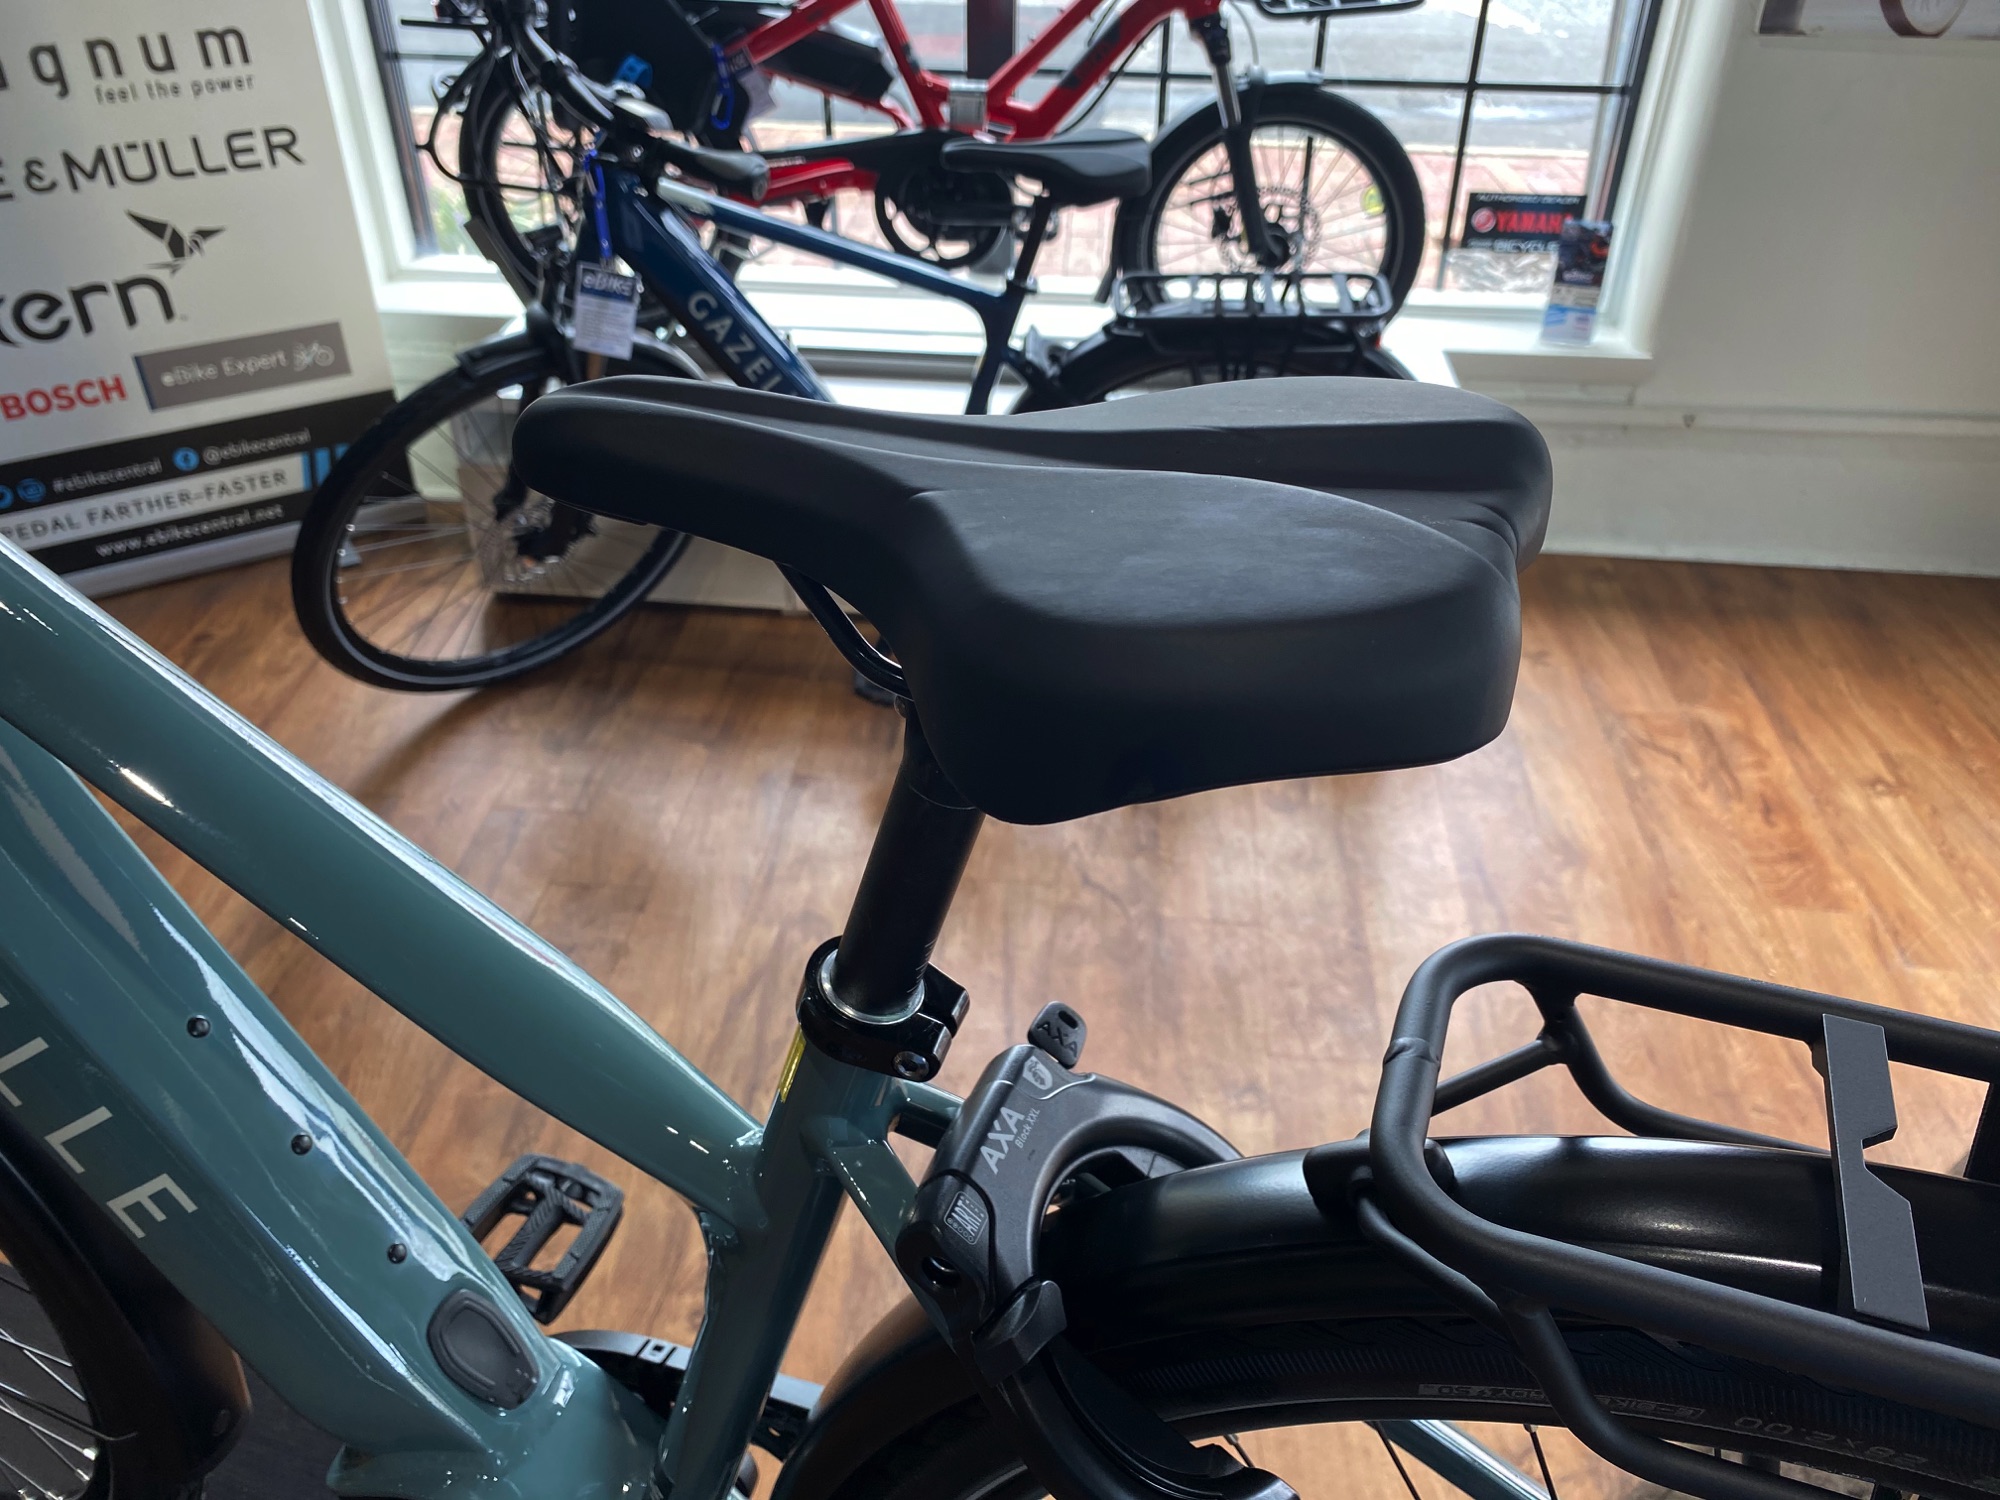 Gazelle Medeo T10+ electric pedal assist bicycle